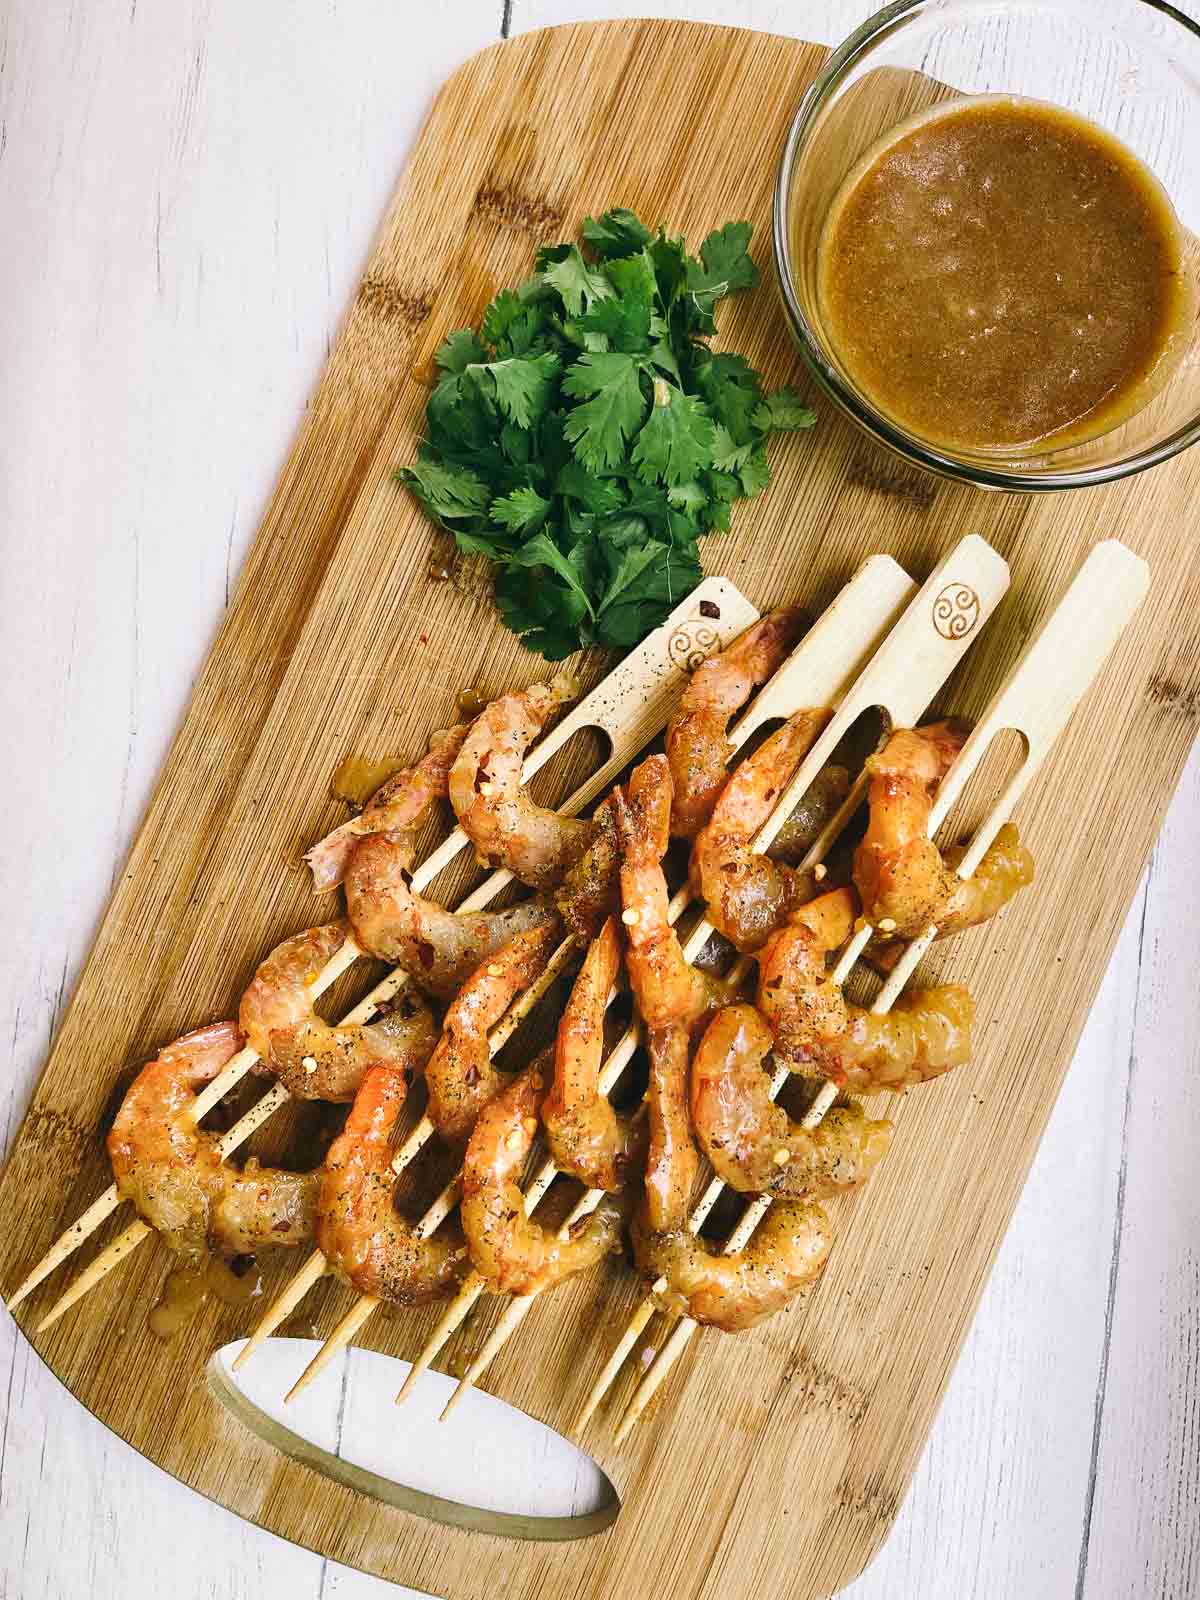 Shrimp on wooden skewers on top of a wooden cutting board ready to be grilled with a side of miso sauce and fresh cilantro.